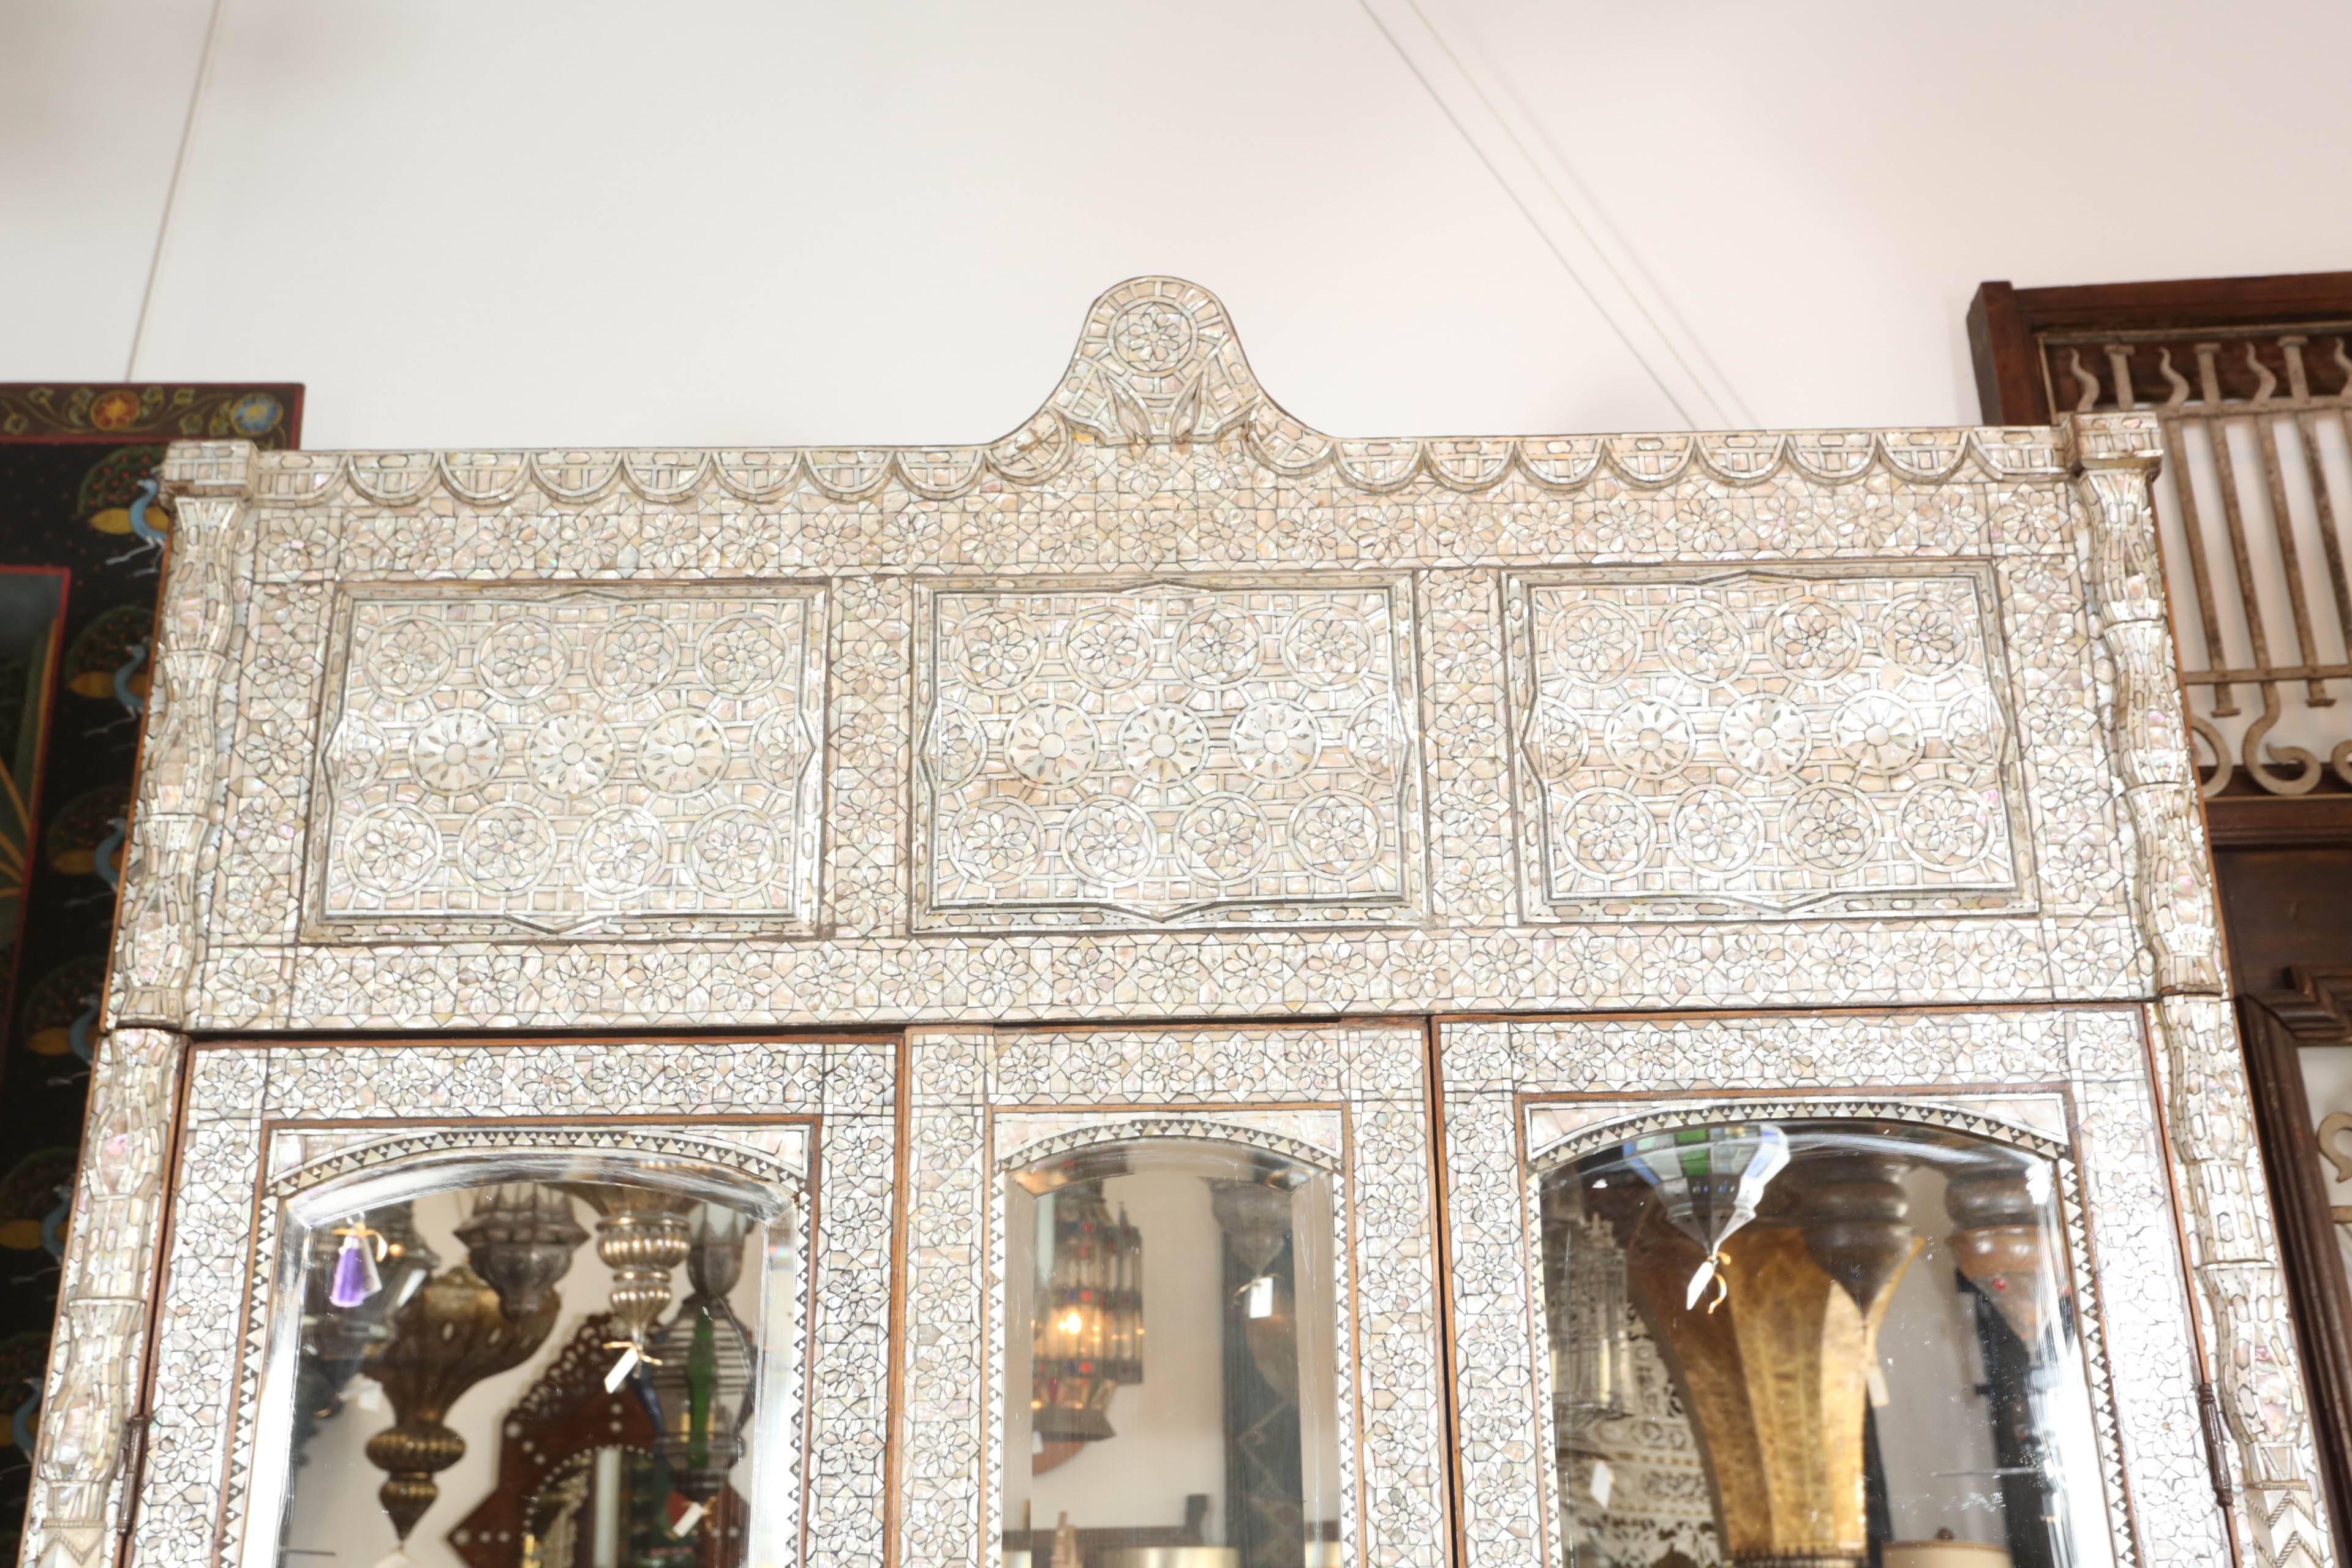 Antique 19th century Middle Eastern Syrian armoire with mirrored doors and drawers.
One of a kind gorgeous handcrafted armoire inlaid with mother-of-pearl and ebony in Florentine and Moroccan Moorish intricate designs.
Each piece pf shell was